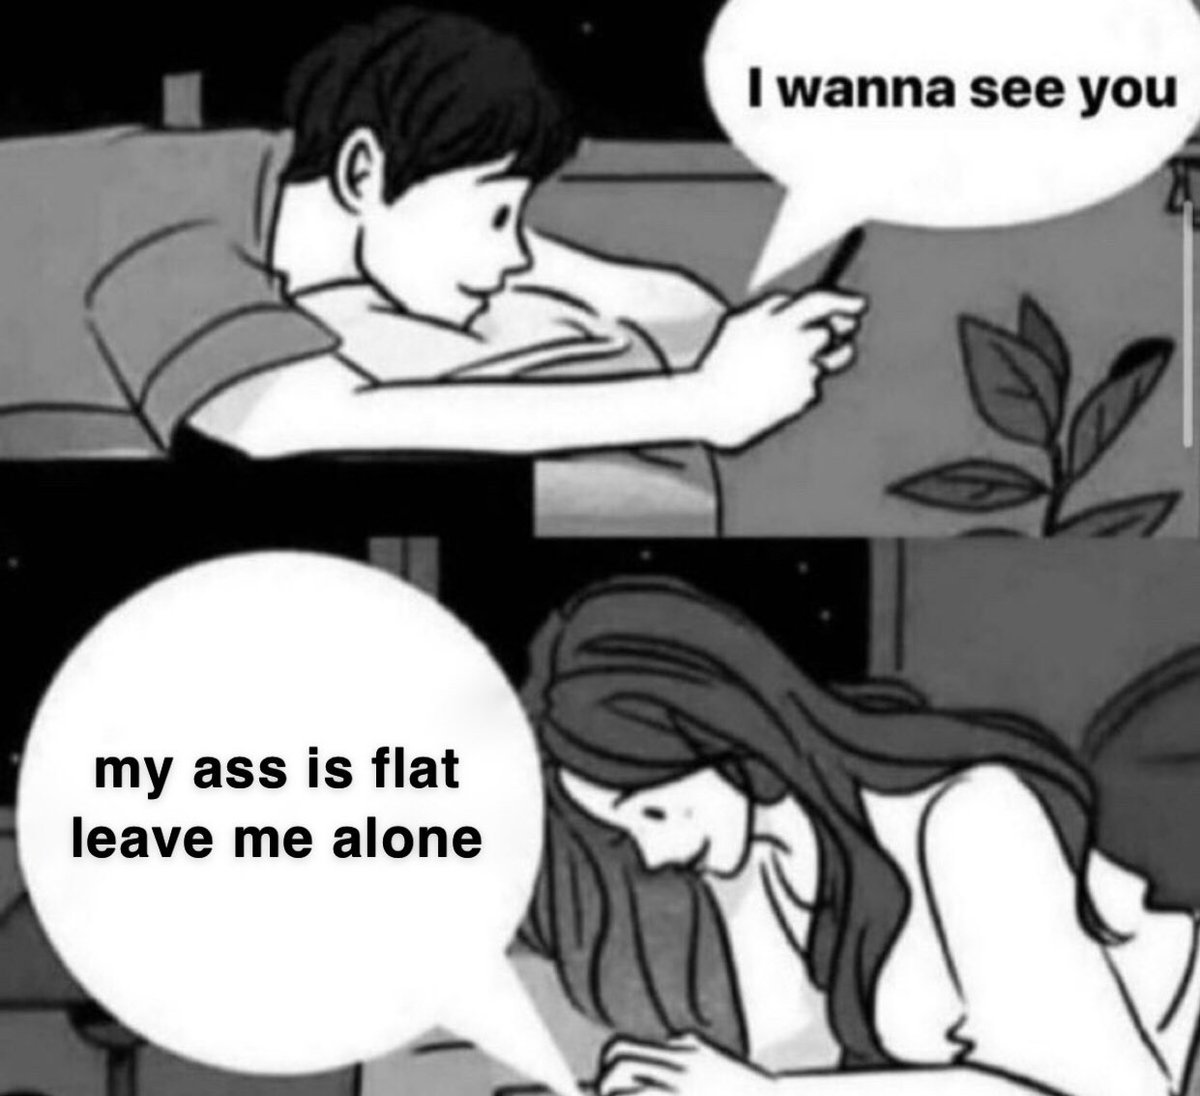 Reactions Texting In Bed Meme I Wanna See You My Ass Is Flat Leave Me Alone